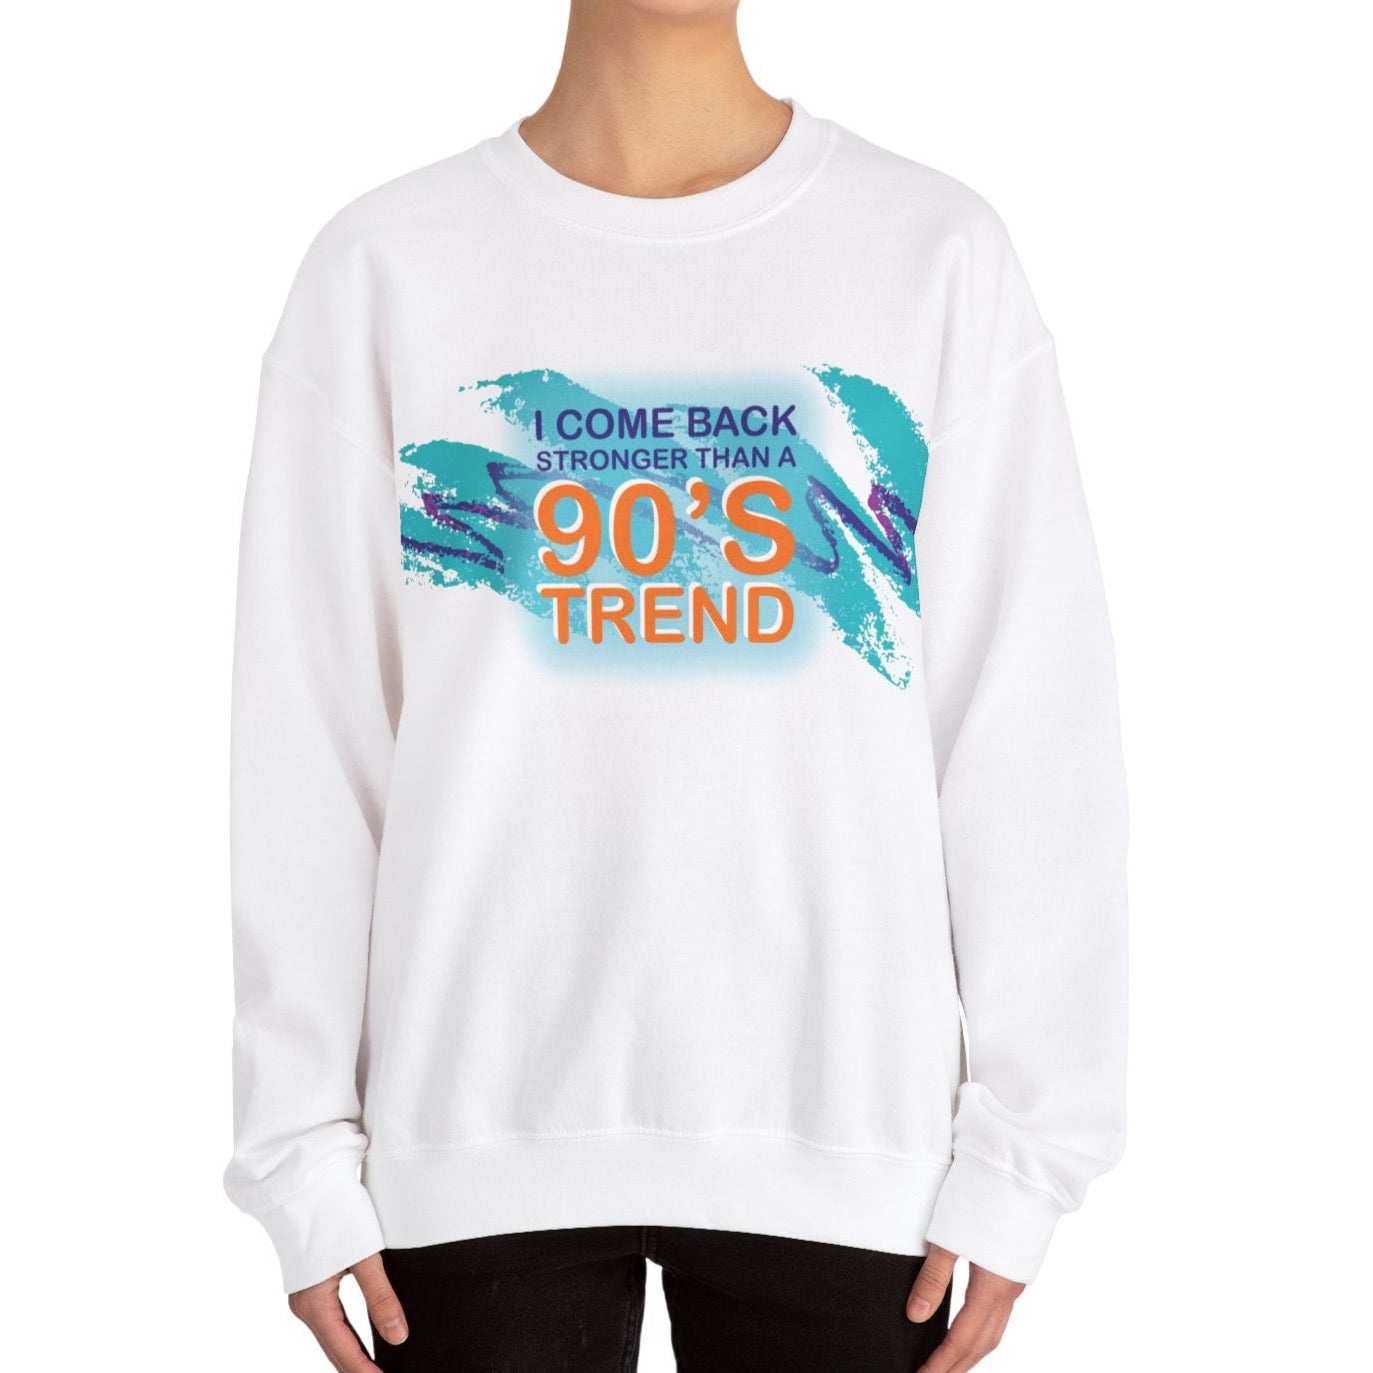 crew neck sweater featuring the iconic design of "I come back stronger then a 90s trend" with the retro Jazz Design.